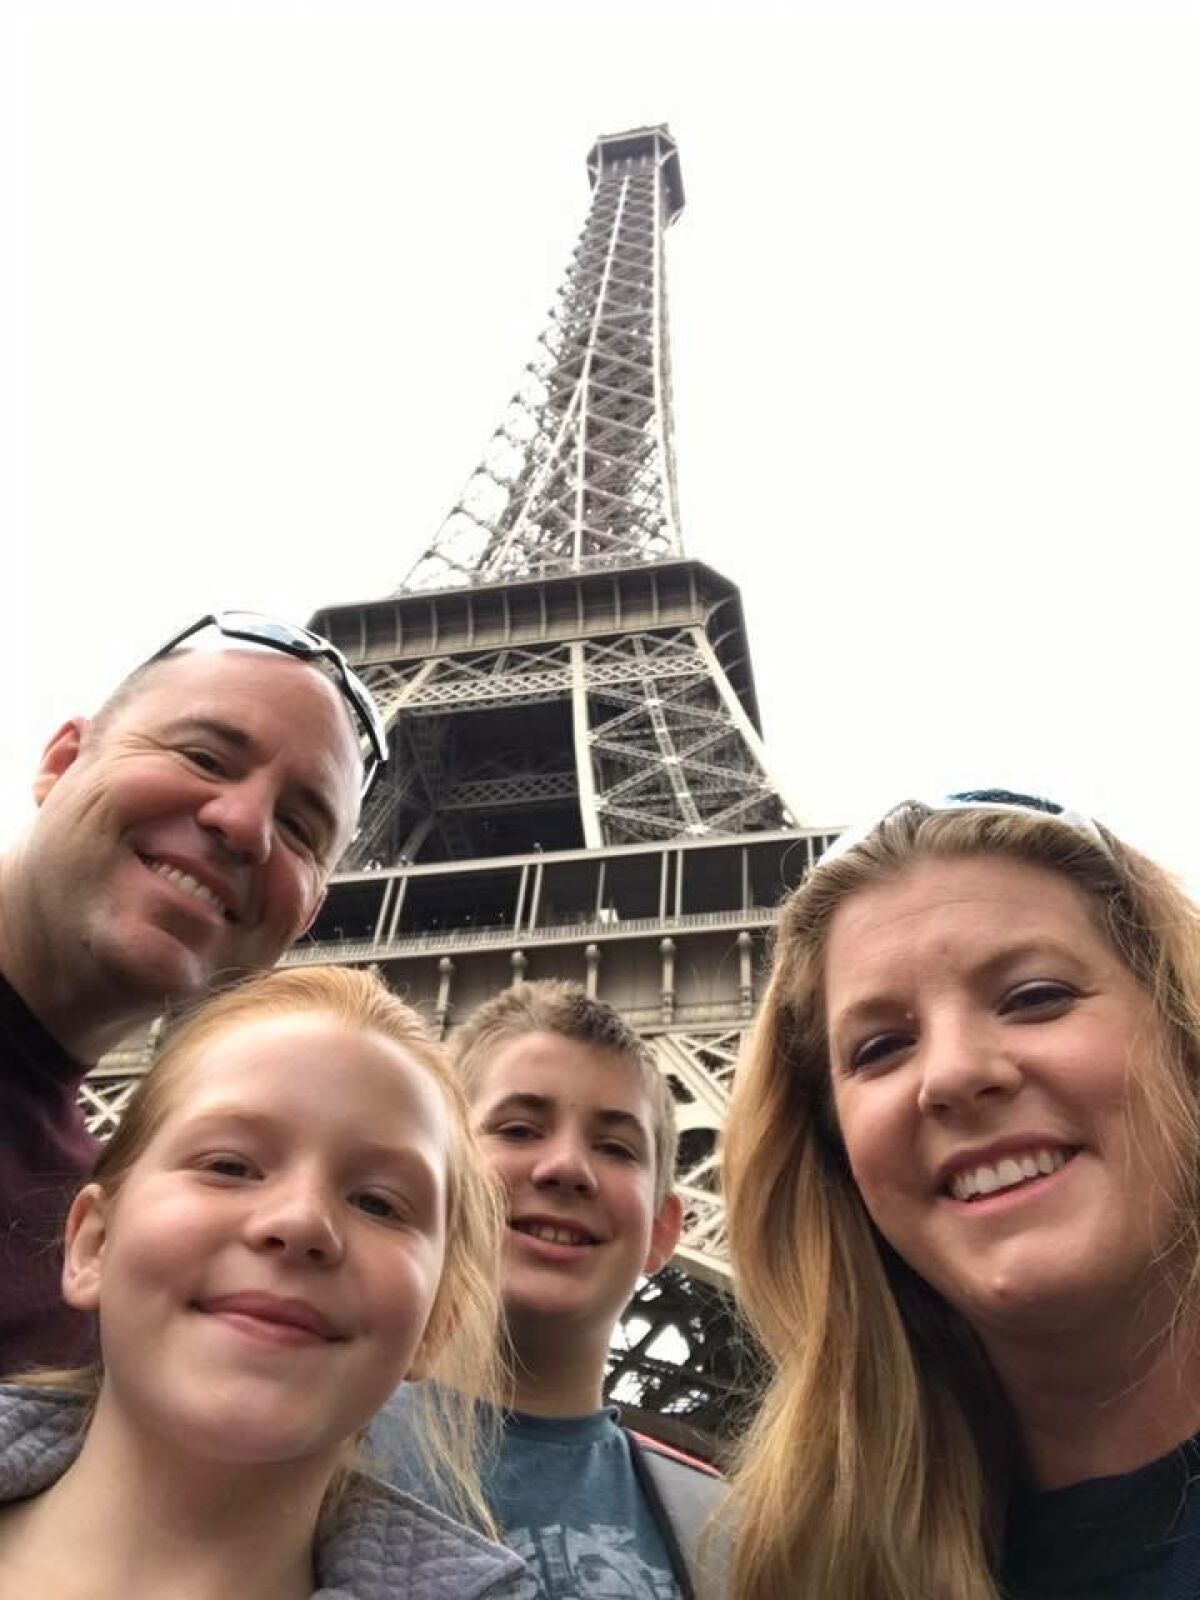 Scott, Kiera, Jackson and Nancy Latulippe, (left to right) in 2016 on vacation in Paris.